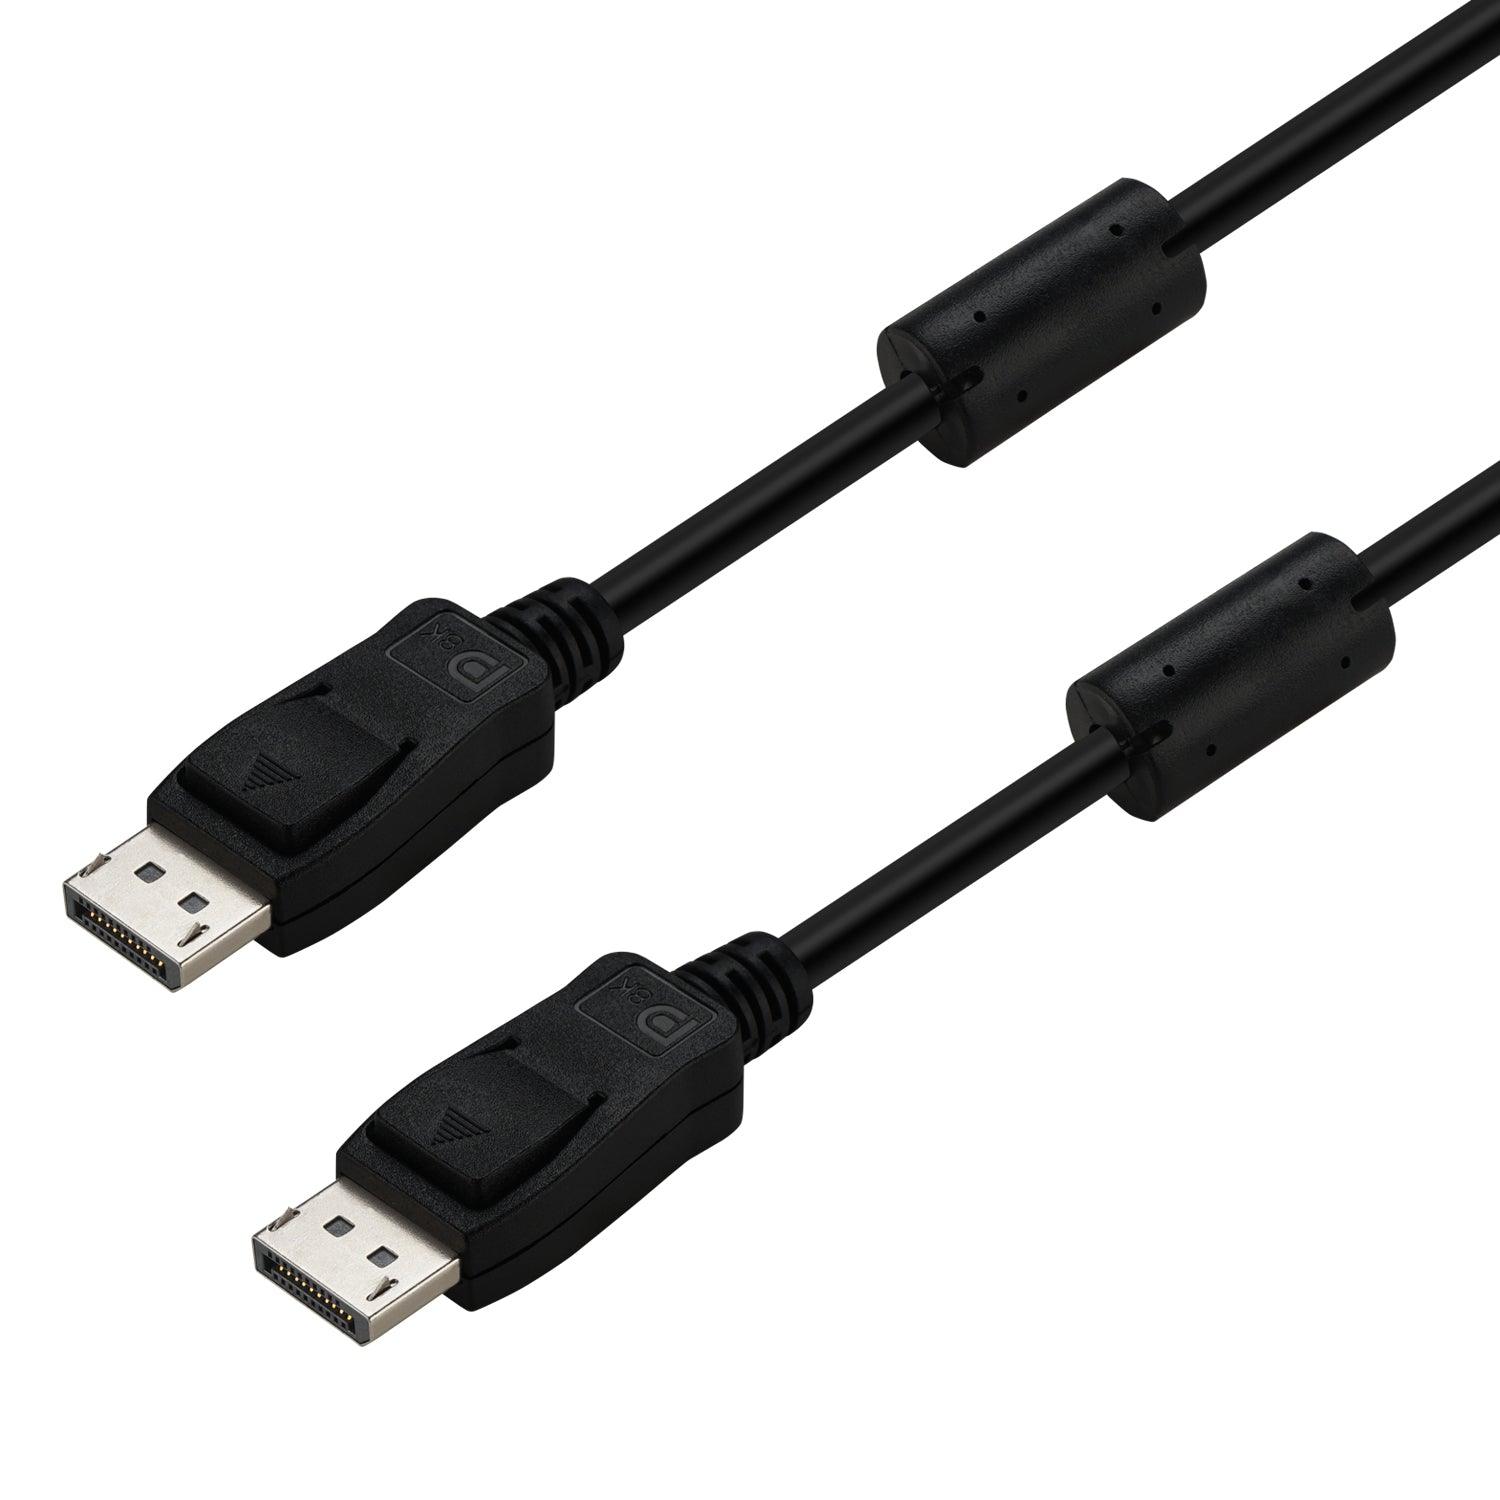 DisplayPort 1.4 Cable 3.9ft (1.2M) with Double Ferrit Core Clamps for Anti Electromagnetic Interferance, DP Male to DP Male Cable 8K@60Hz, 2K@240Hz, 4K@144Hz, 32.4Gbps - CKL KVM Switches